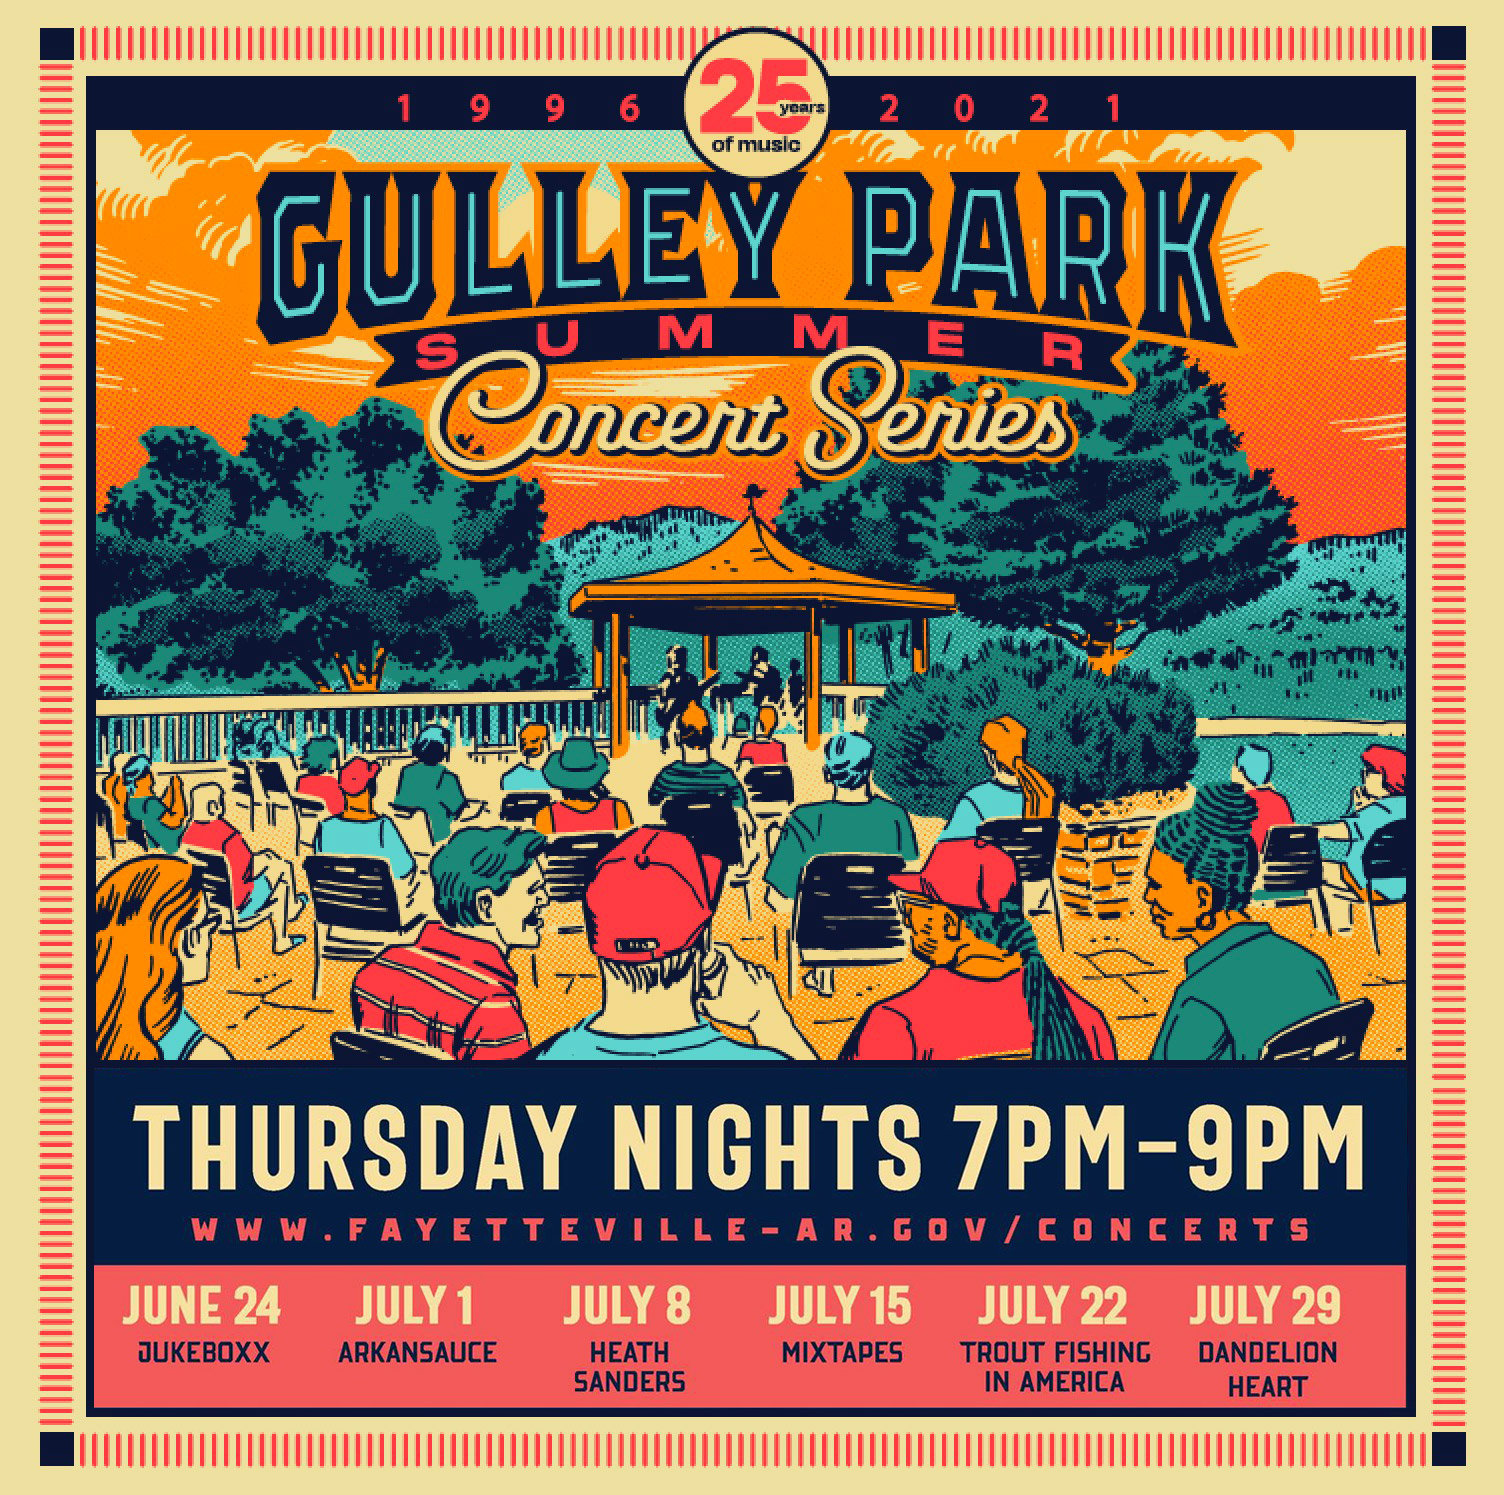 Gulley Park Concert Series to return, celebrate 25th anniversary this